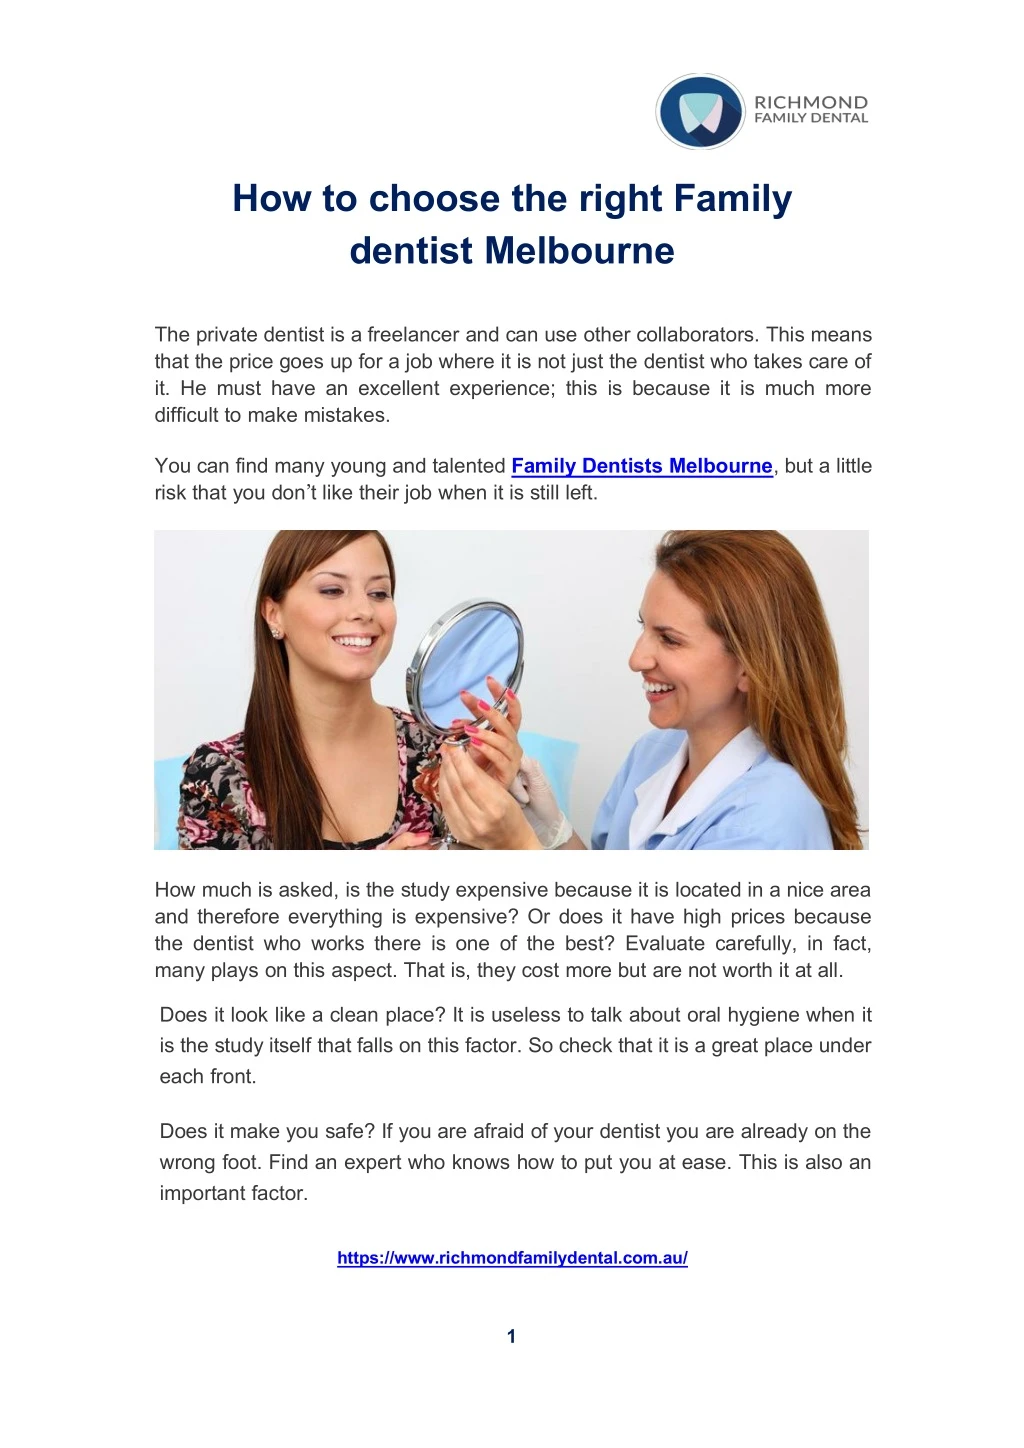 how to choose the right family dentist melbourne